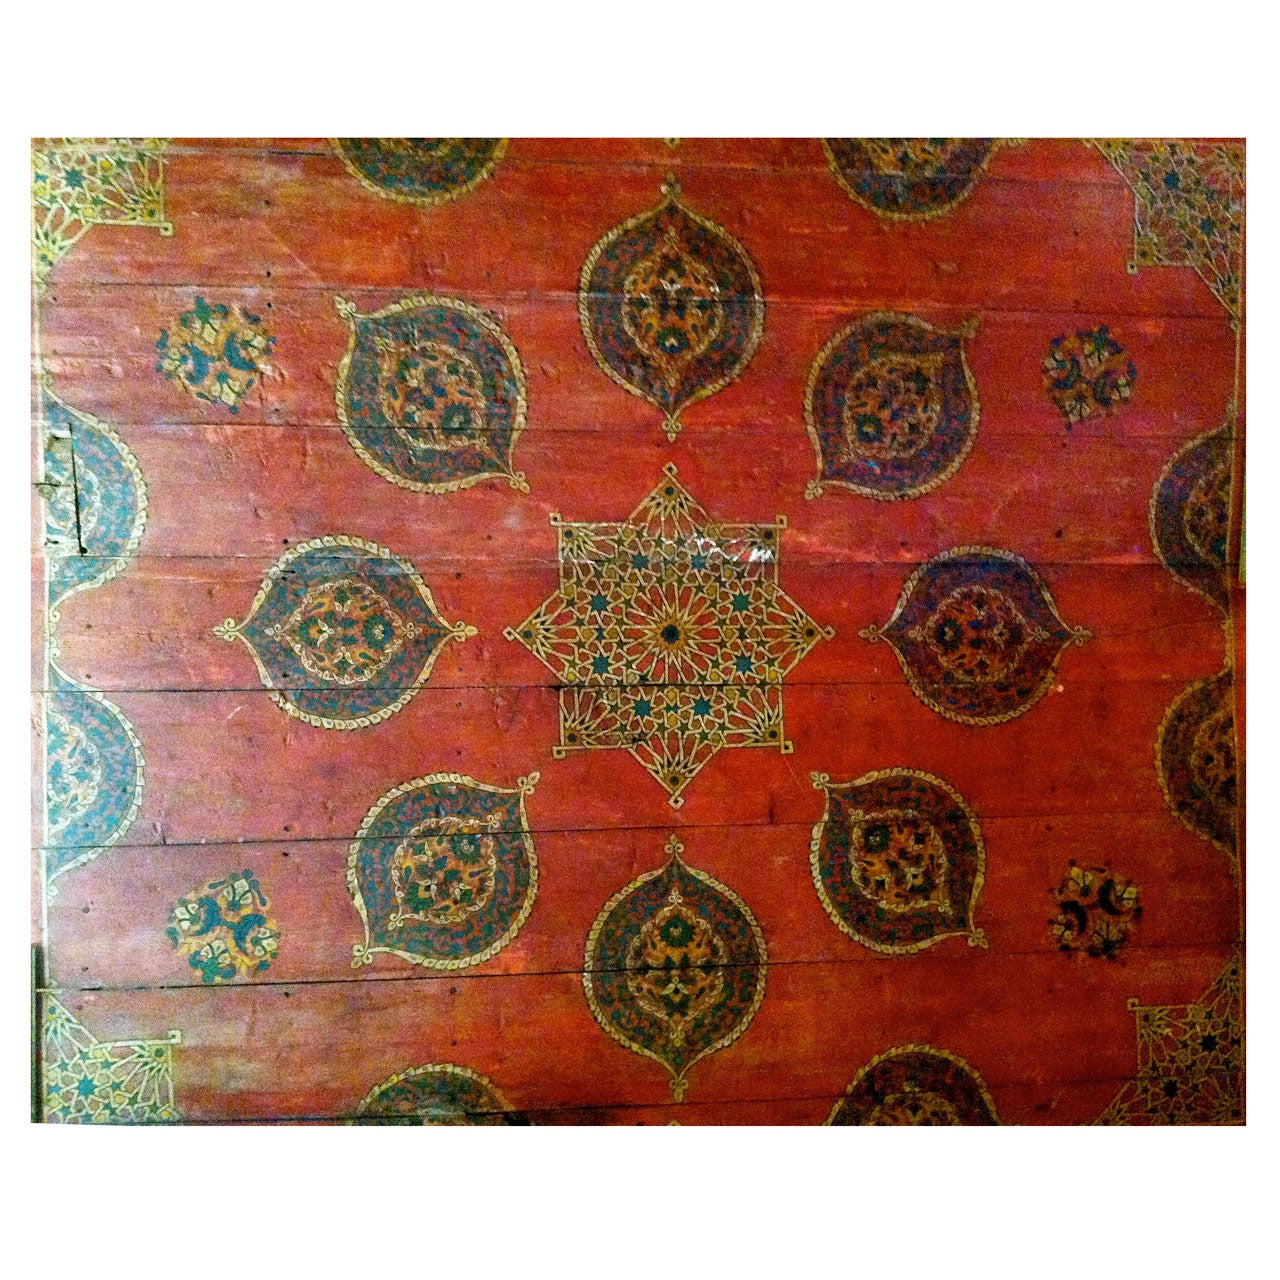 19th C.Hand Painted Moroccan Ceiling Panel